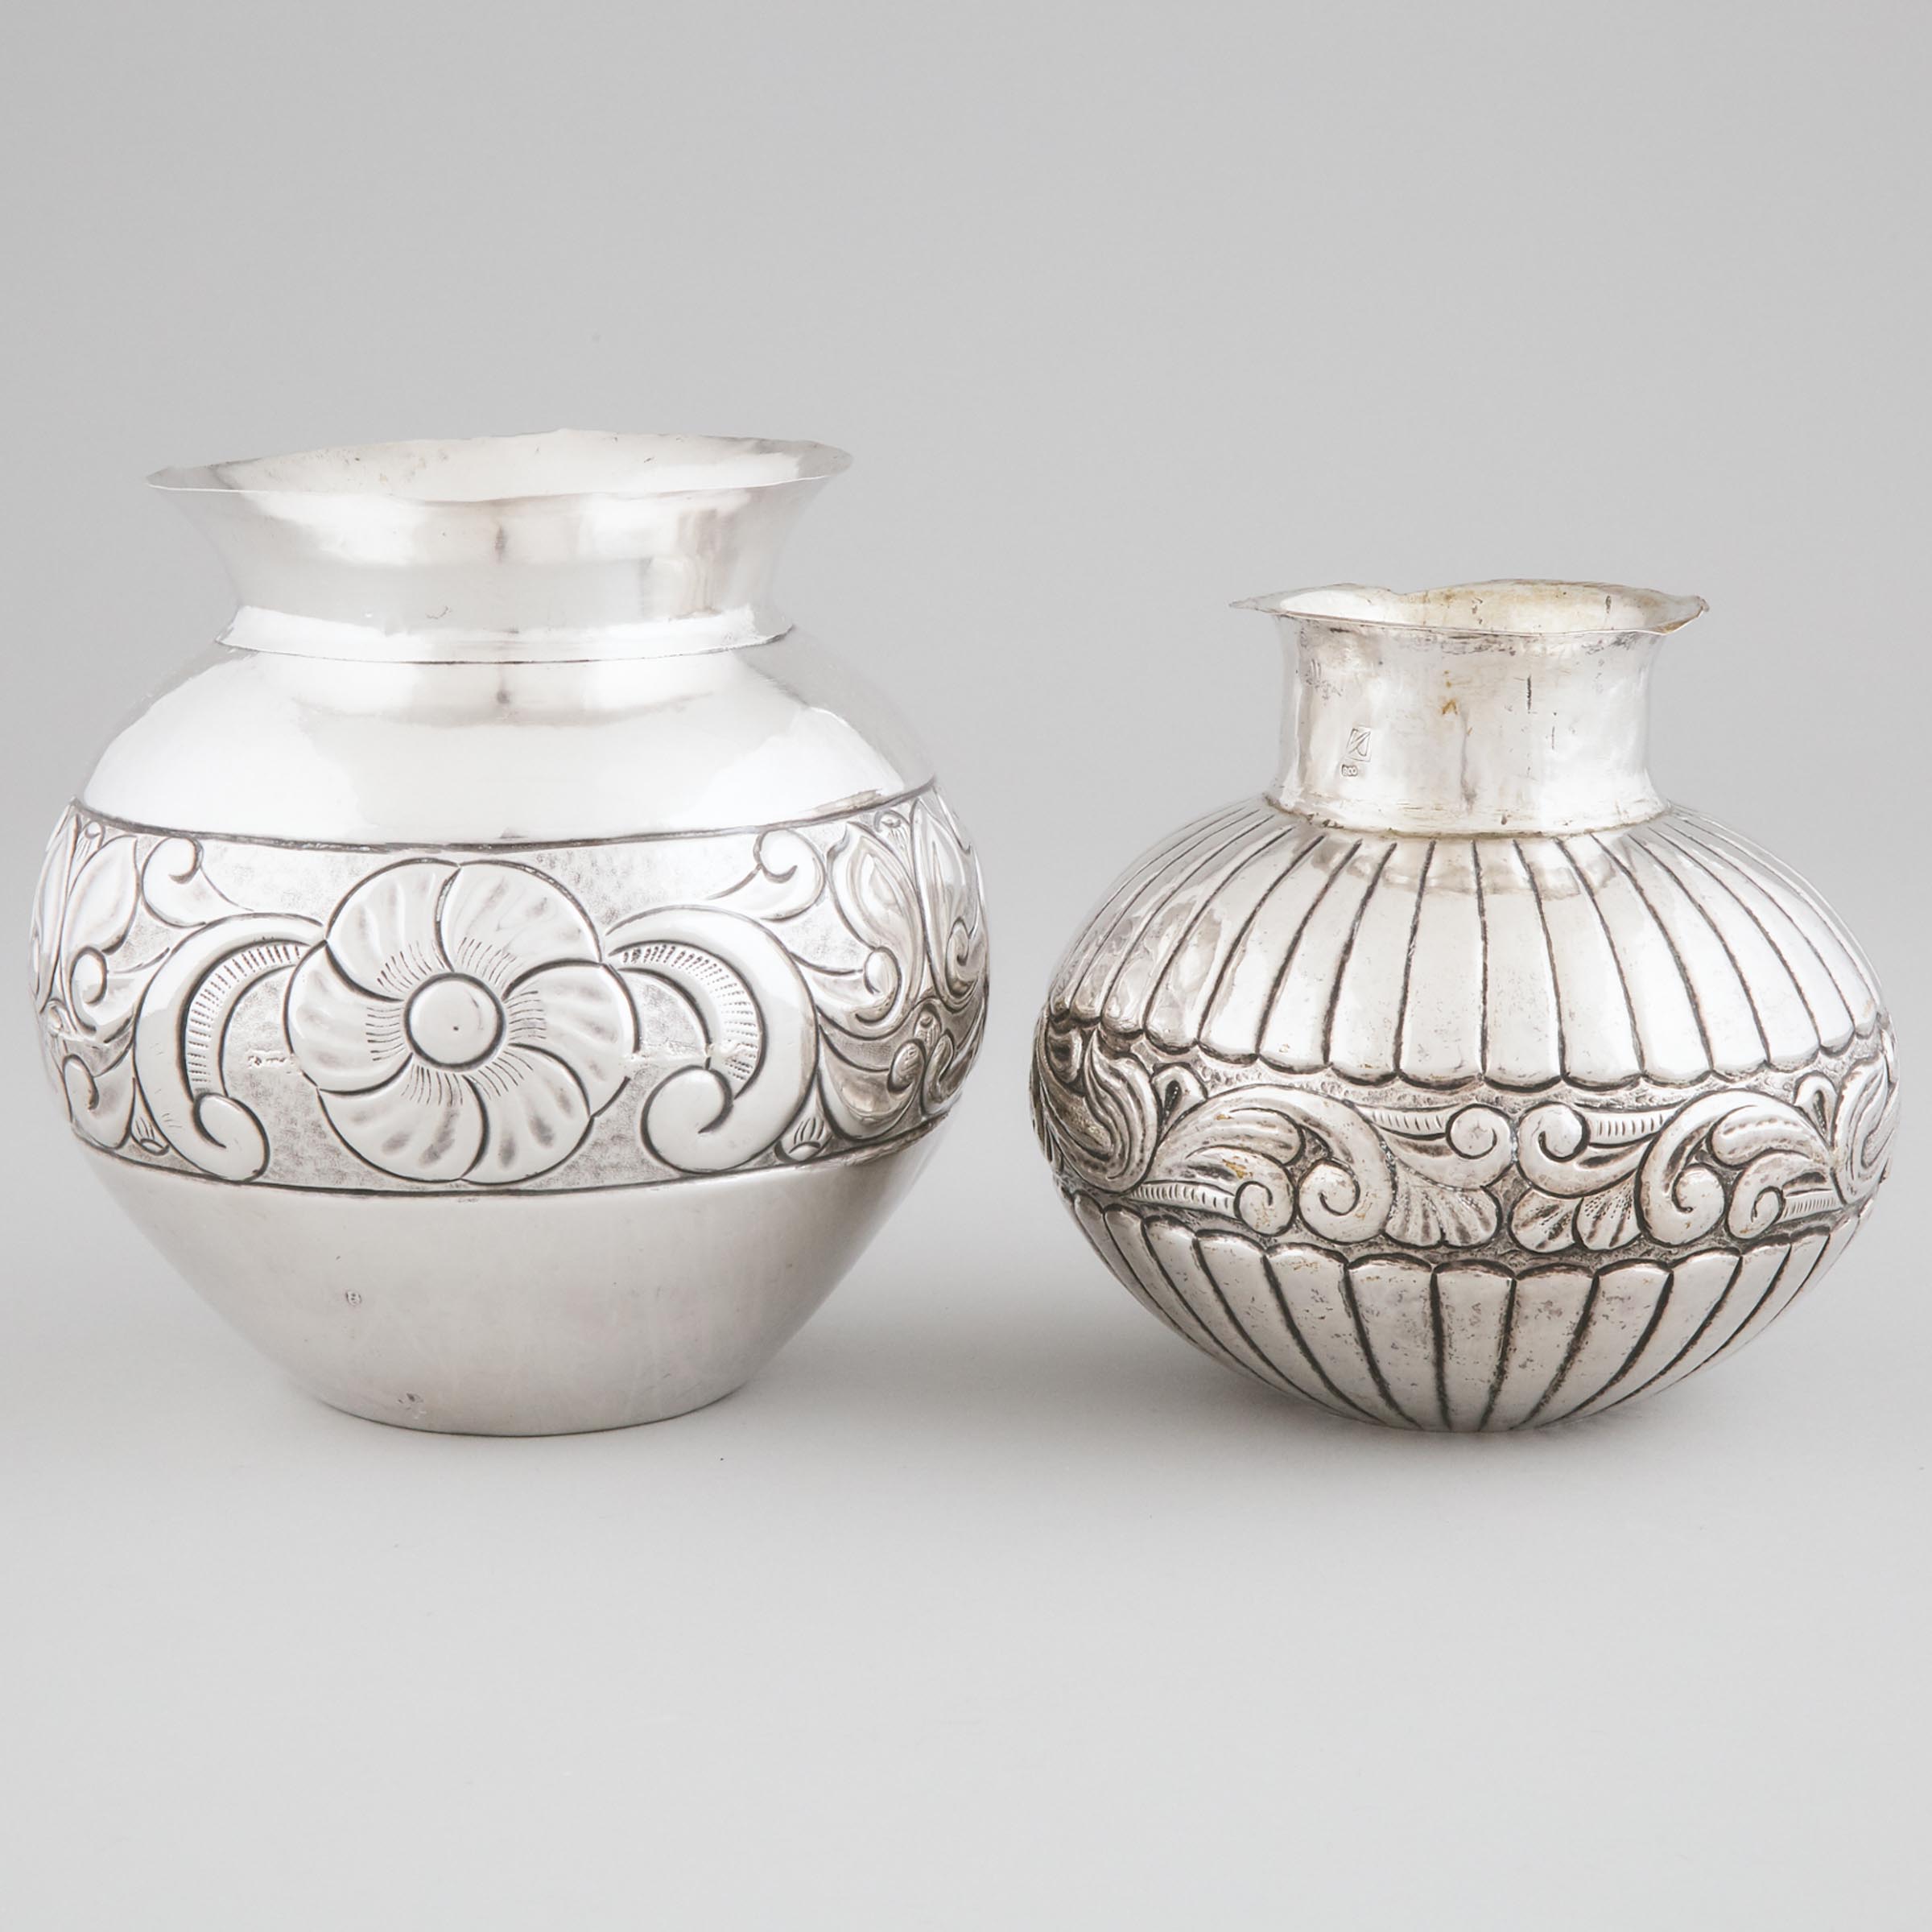 Two Peruvian Silver Vases, 20th century